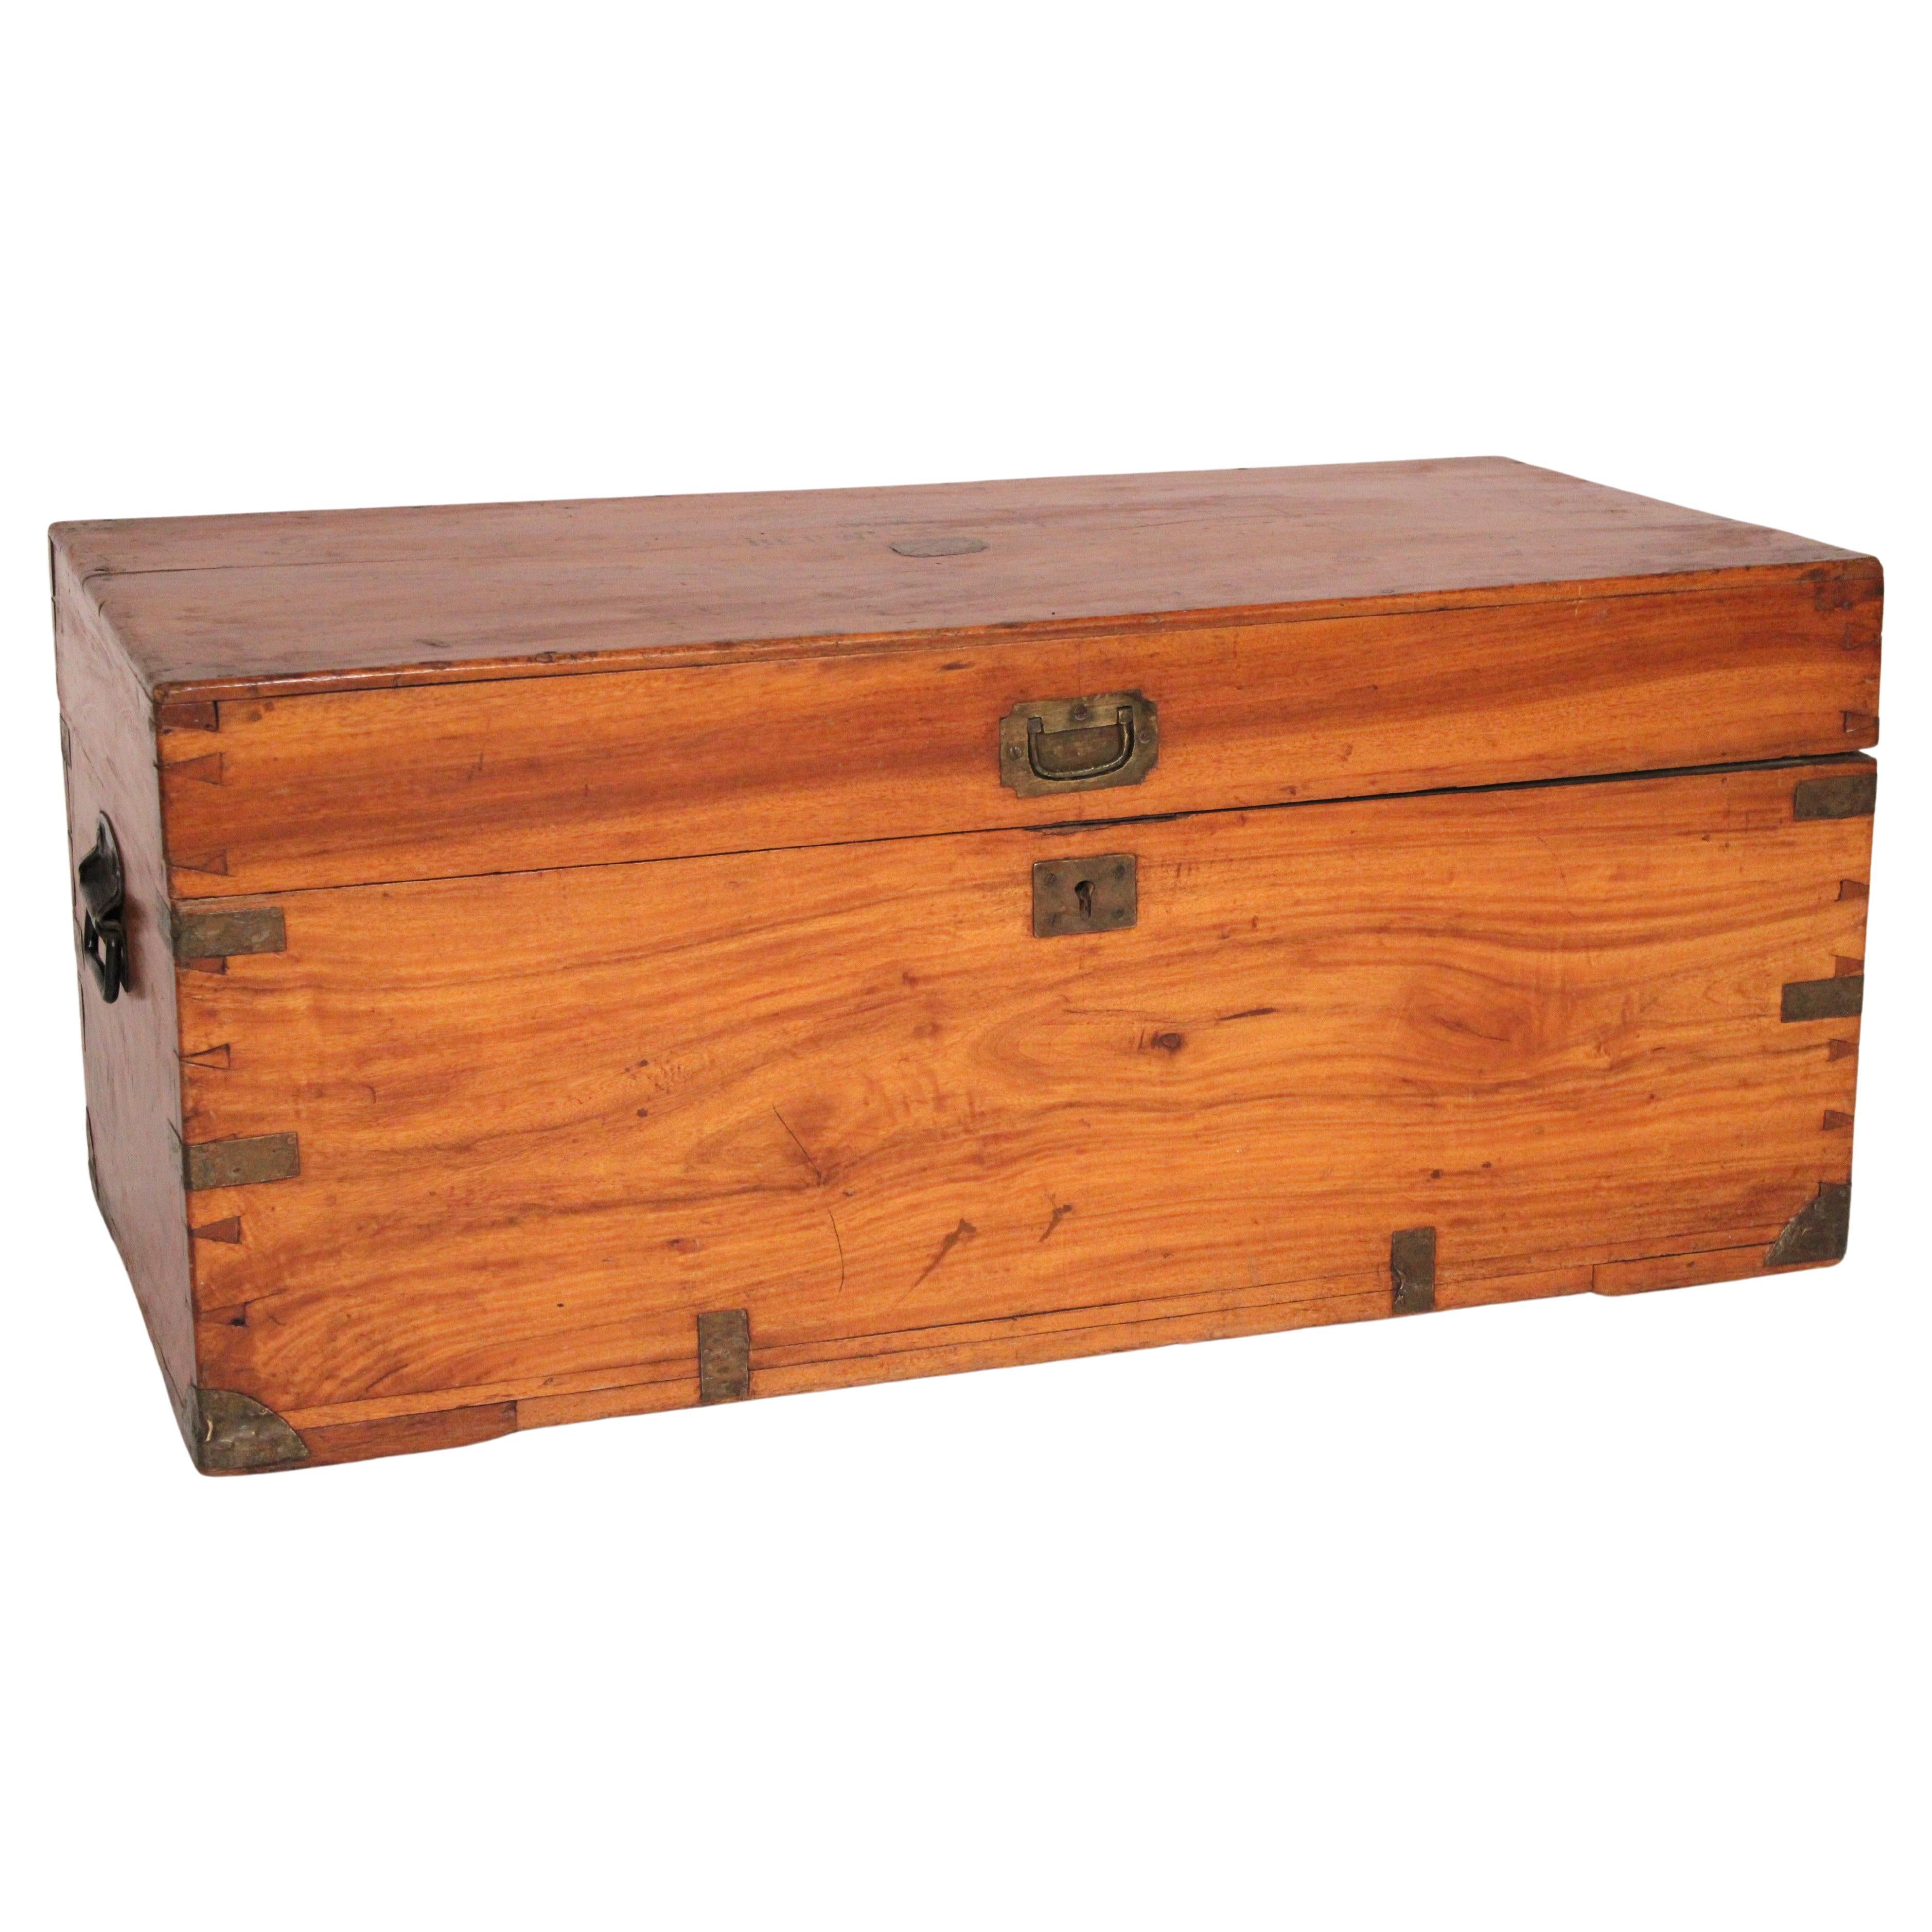 Campaign Style Camphor Wood Trunk